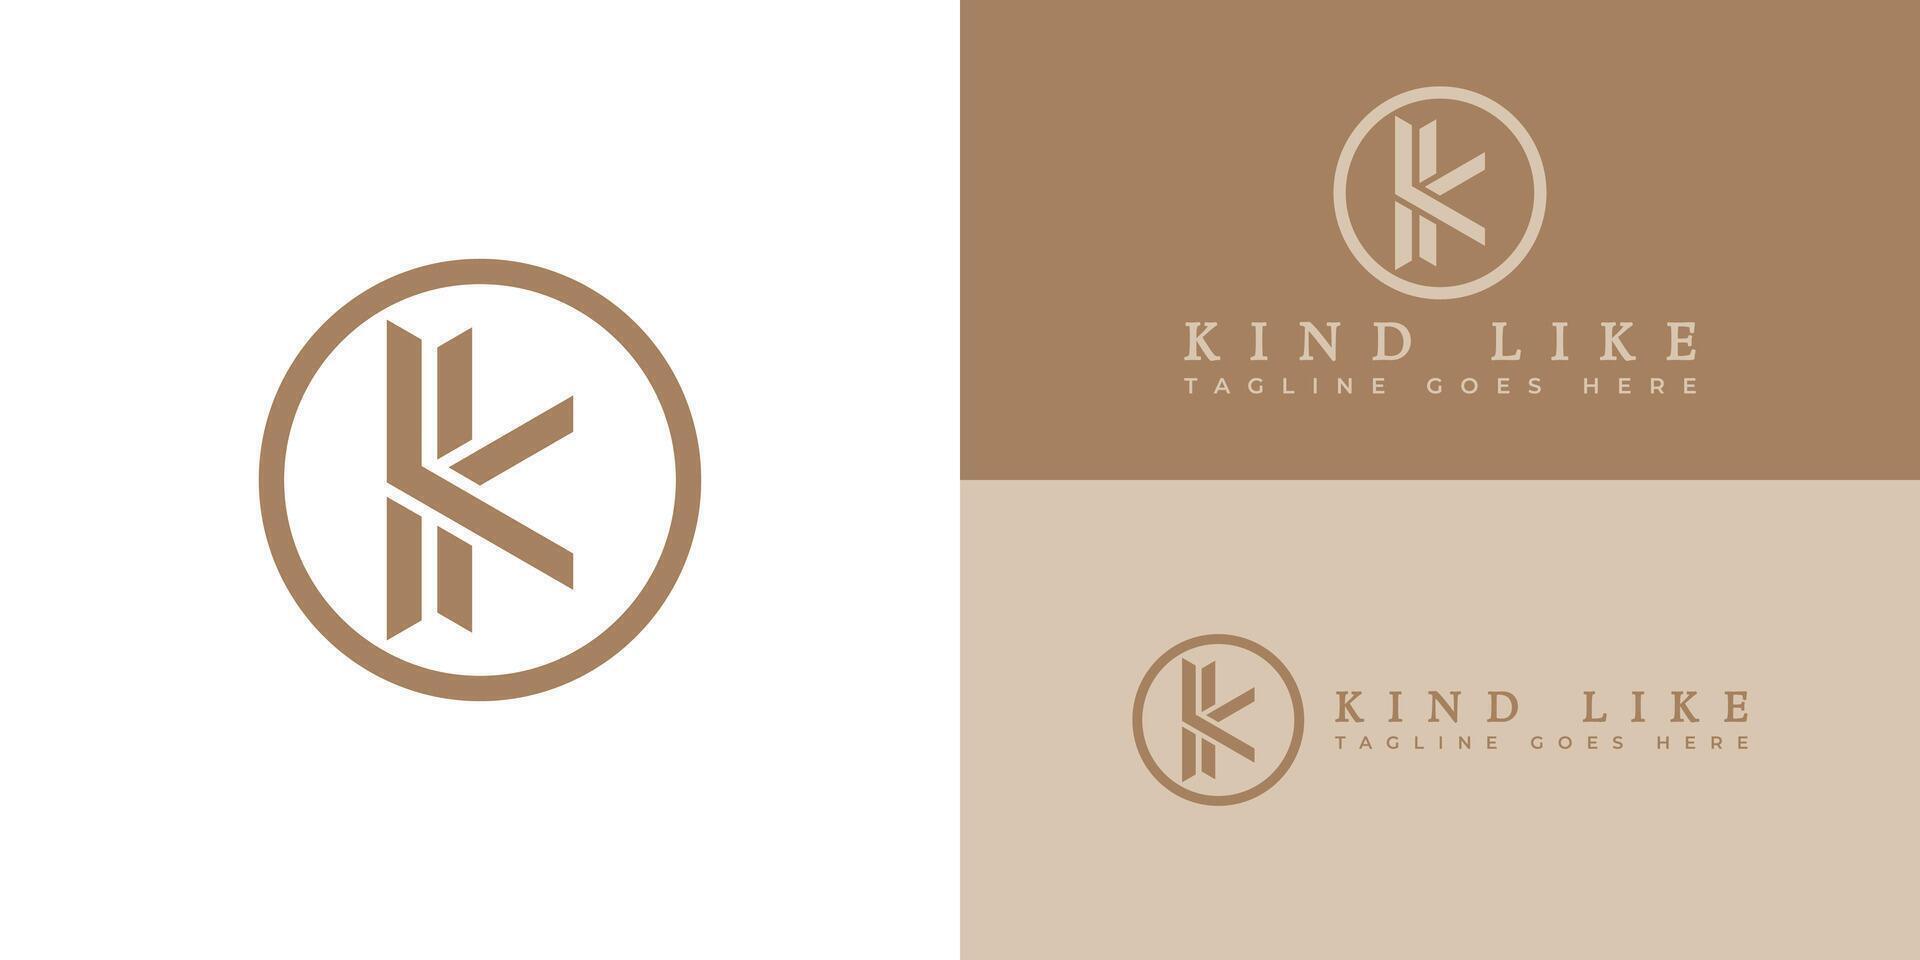 Initial KL Logo hand drawn letter KL or LK in circle vector illustration in gold color isolated on a white background. Abstract letter KL logo applied for beauty and fashion logo design inspiration